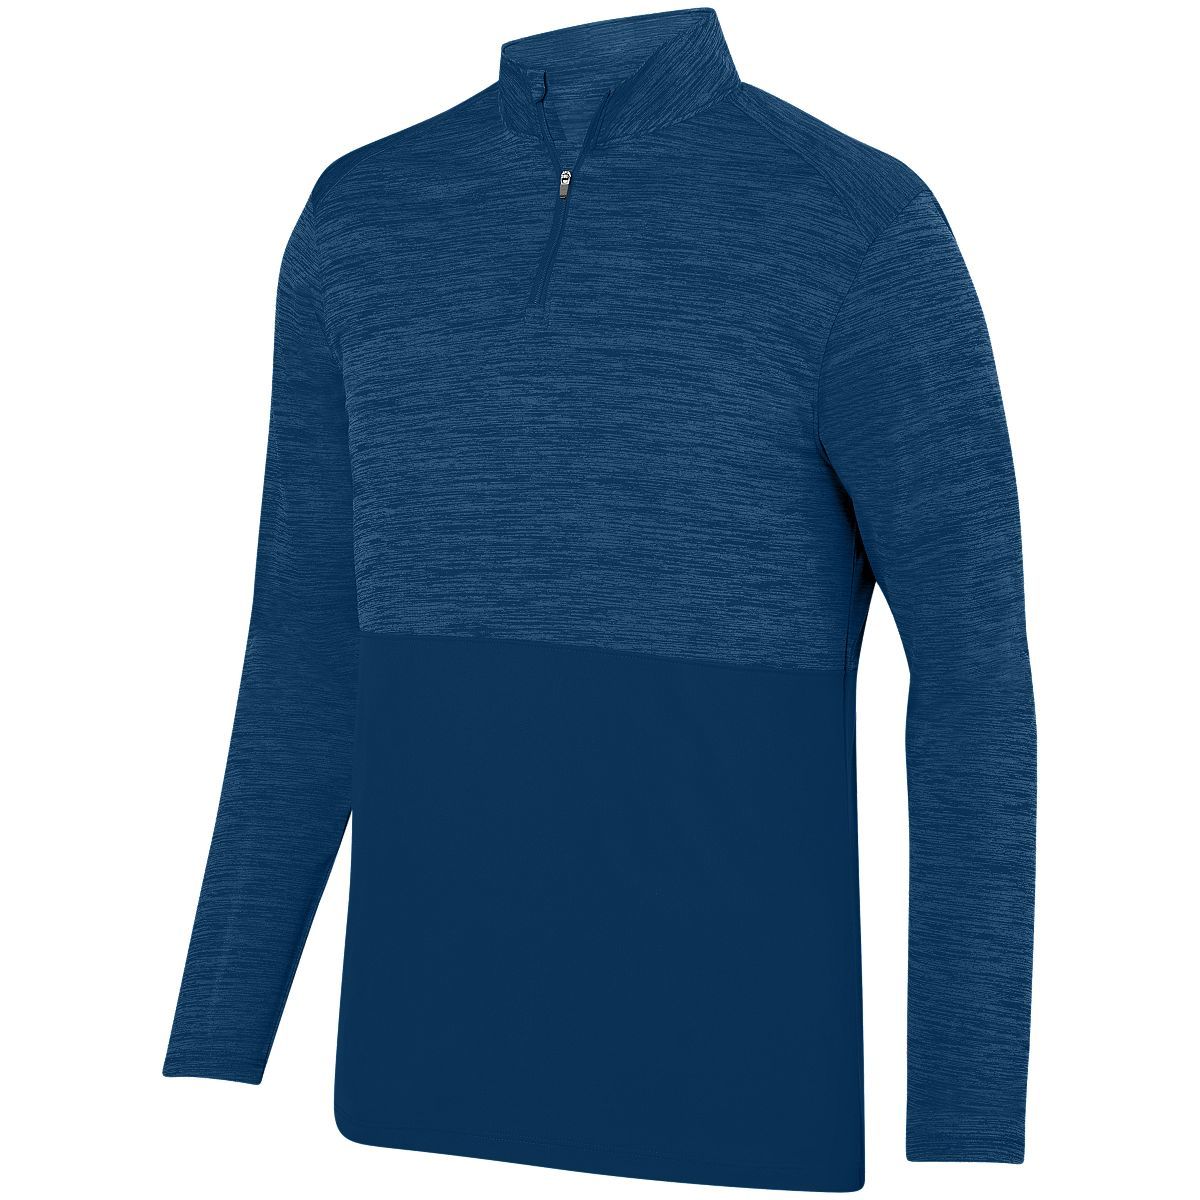 Augusta Sportswear Shadow Tonal Heather 1/4 Zip Pullover in Navy  -Part of the Adult, Adult-Pullover, Augusta-Products, Outerwear, Tonal-Fleece-Collection product lines at KanaleyCreations.com